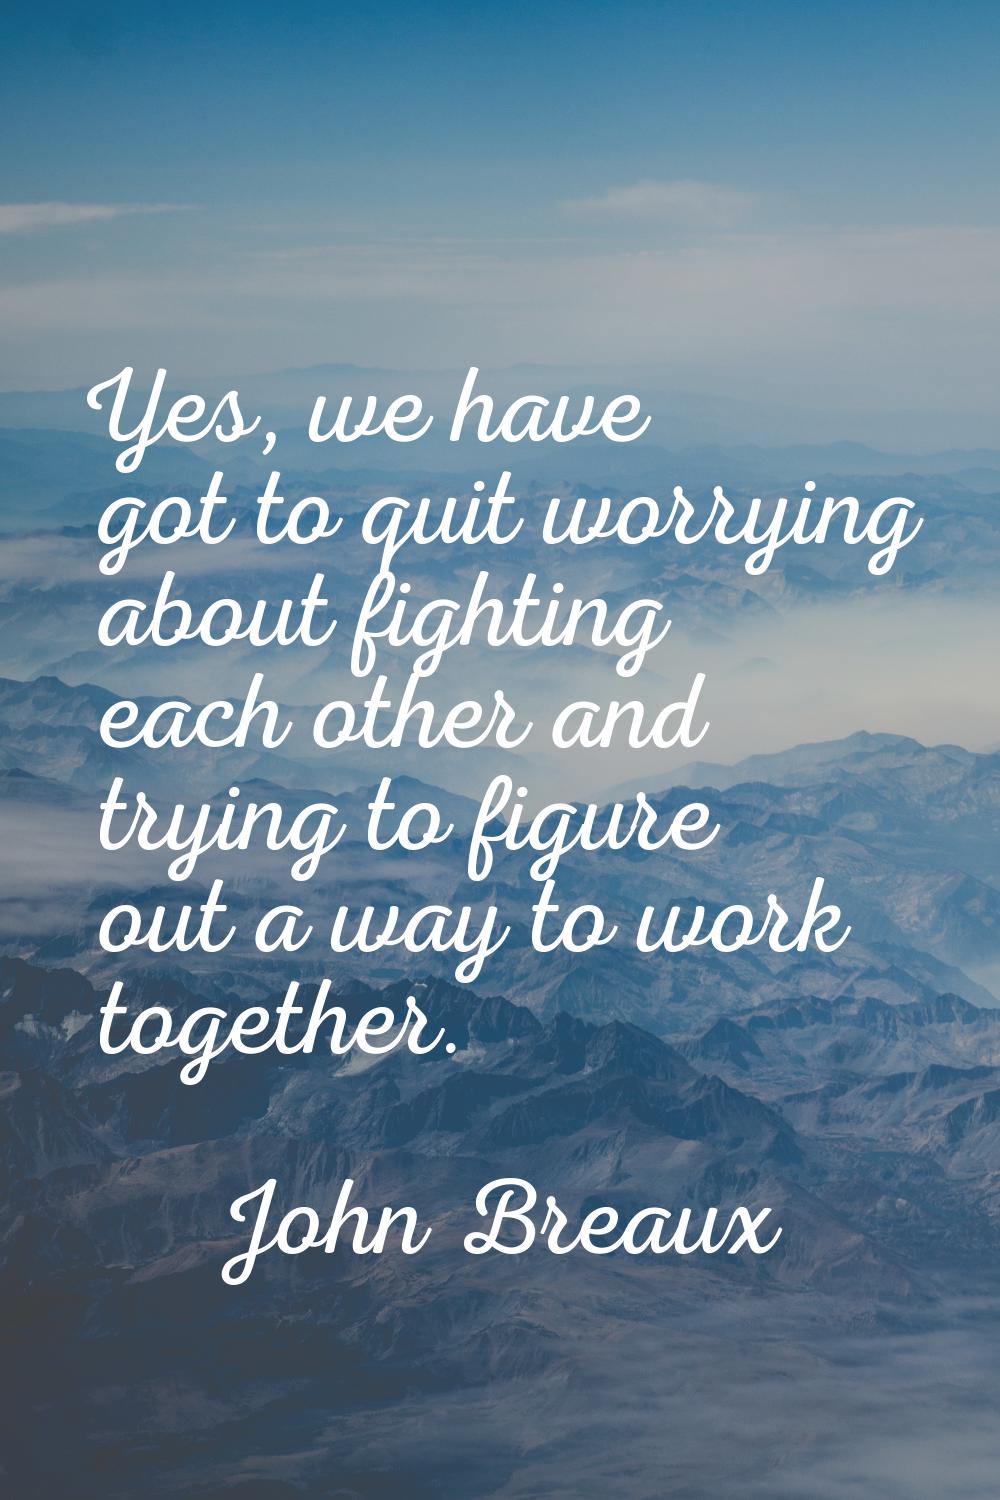 Yes, we have got to quit worrying about fighting each other and trying to figure out a way to work 